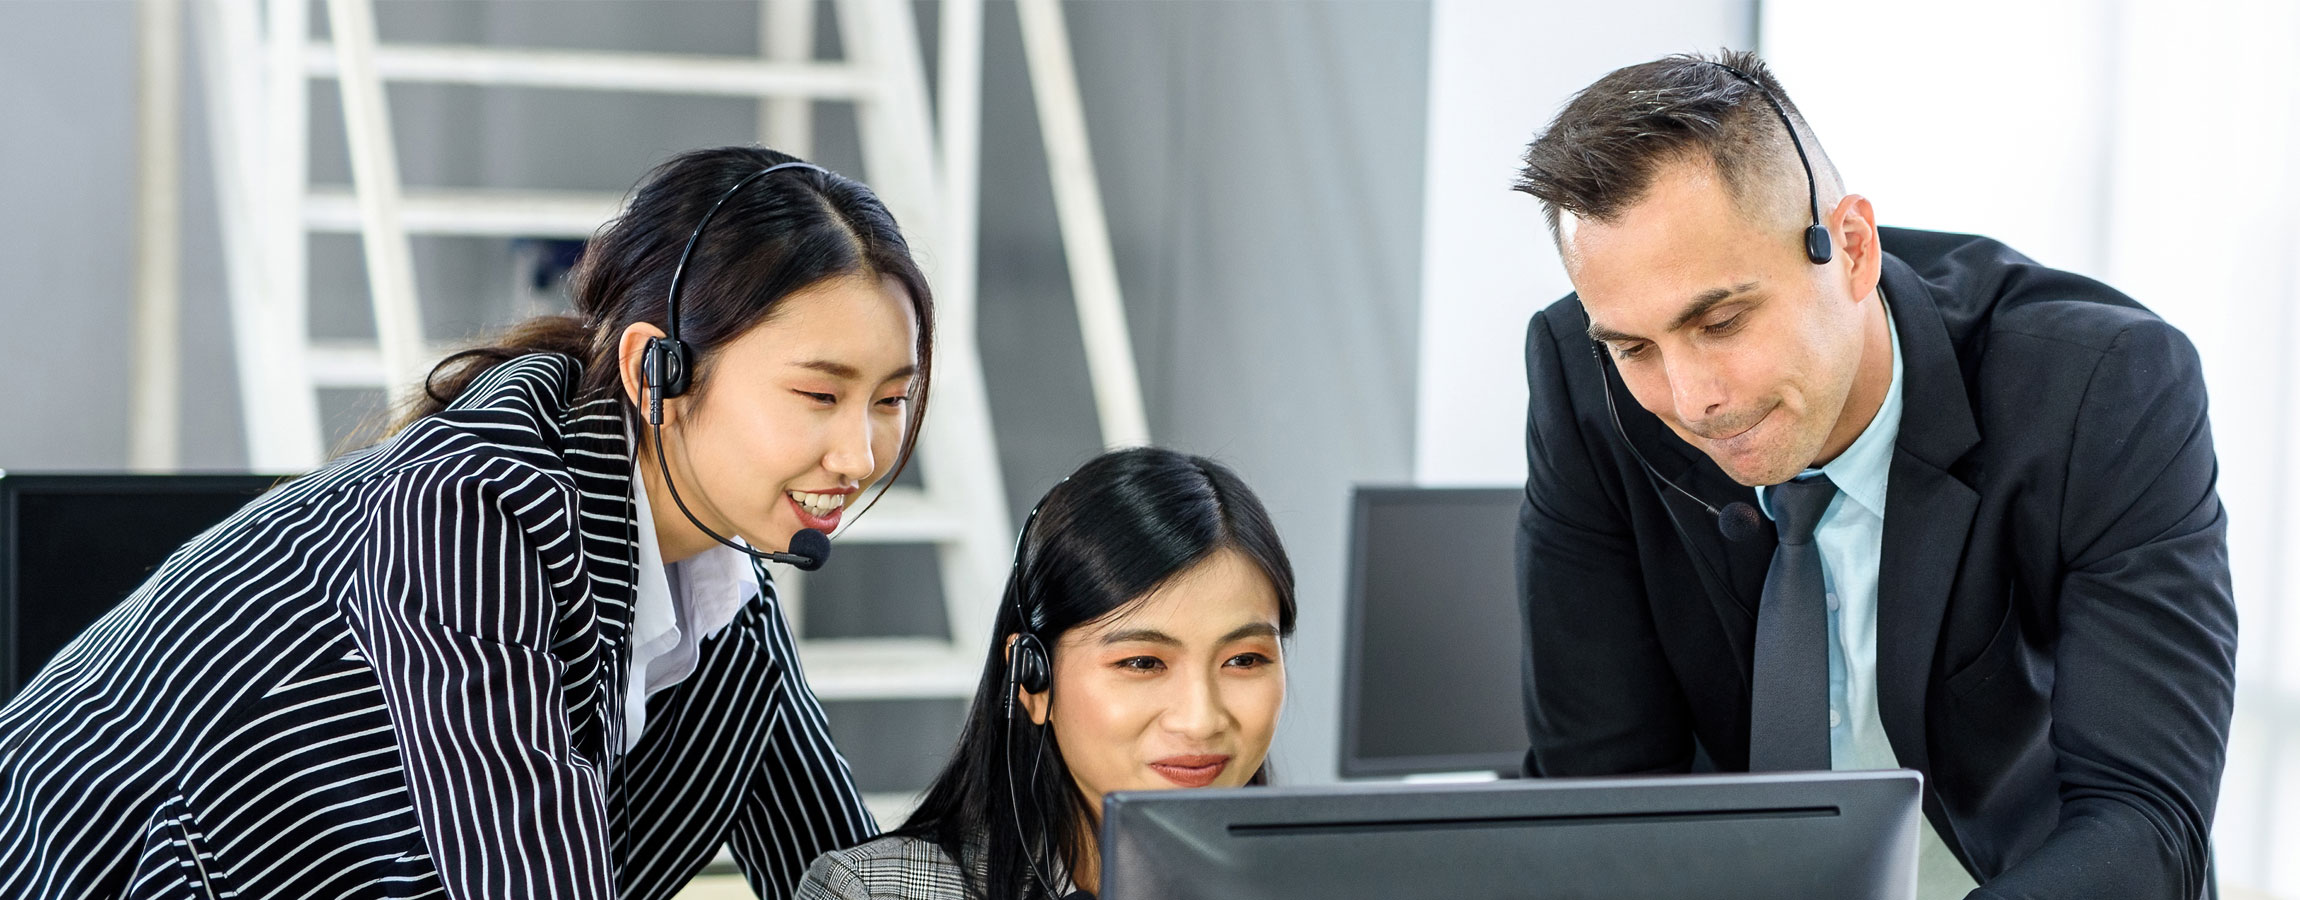 What do investors expect from an outsourced Japanese call center?